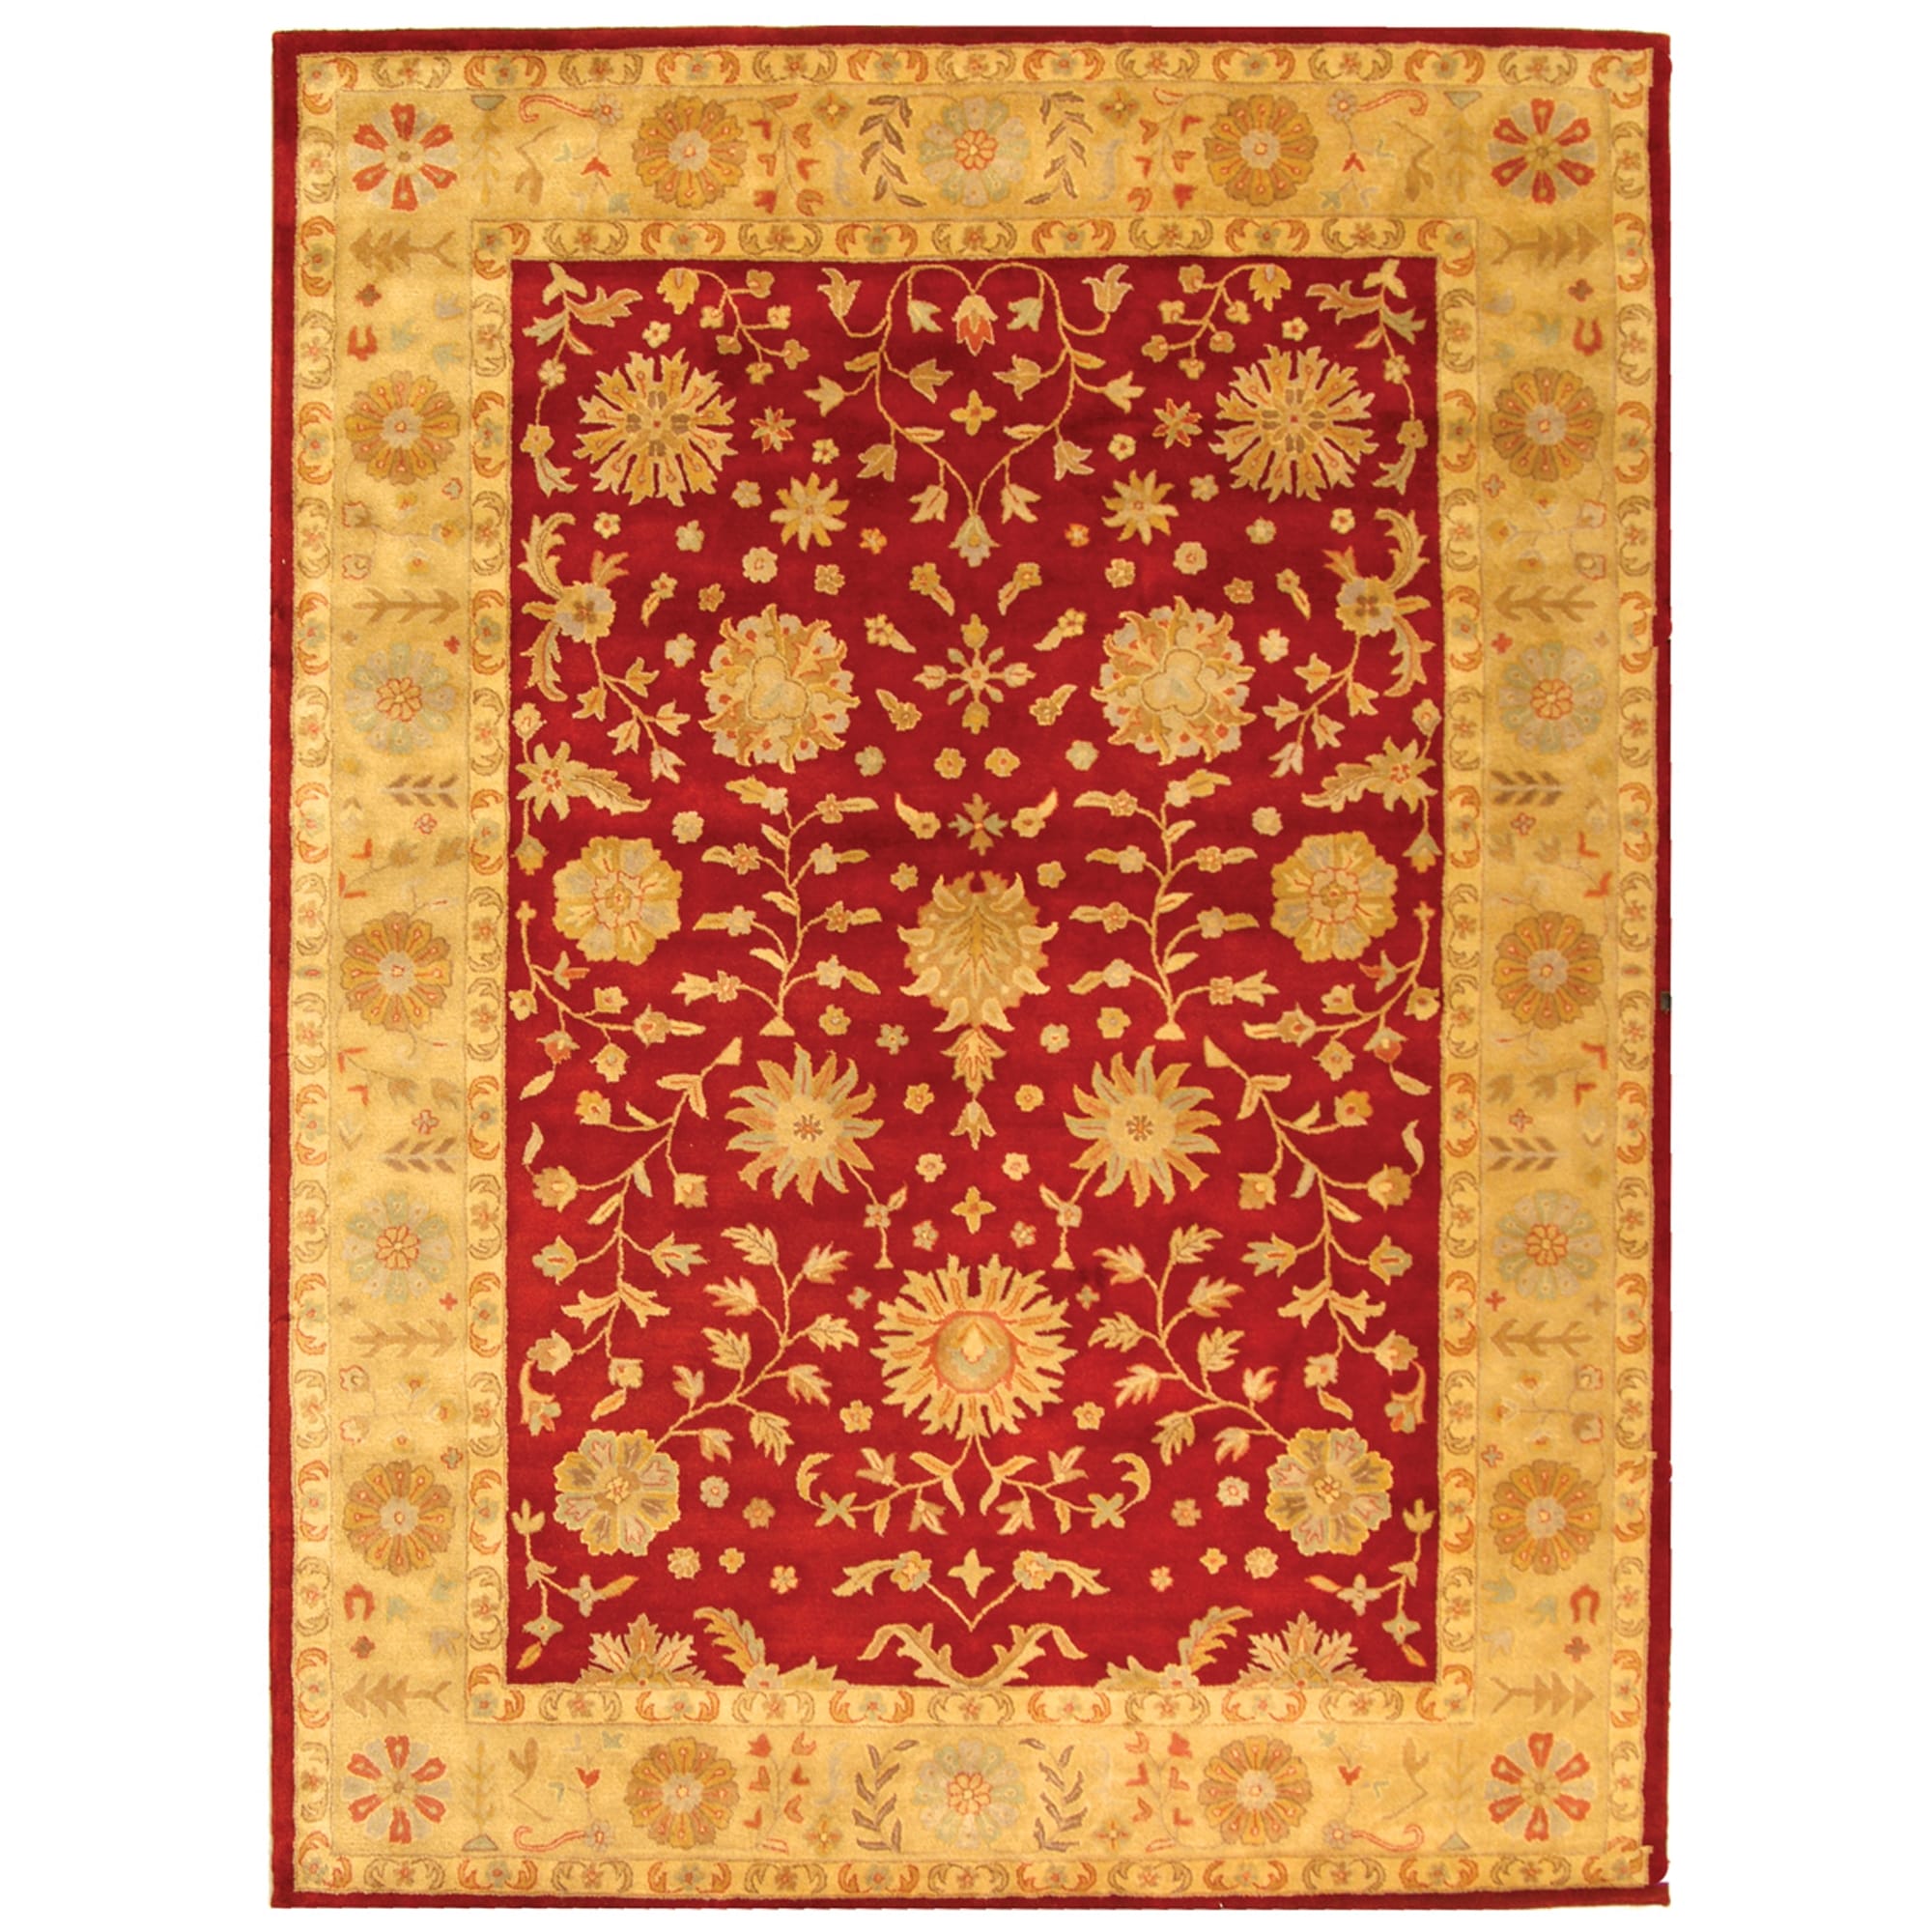 Handmade Heritage Kashan Burgundy/ Beige Wool Rug (5 X 8) (RedPattern OrientalMeasures 0.625 inch thickTip We recommend the use of a non skid pad to keep the rug in place on smooth surfaces.All rug sizes are approximate. Due to the difference of monitor